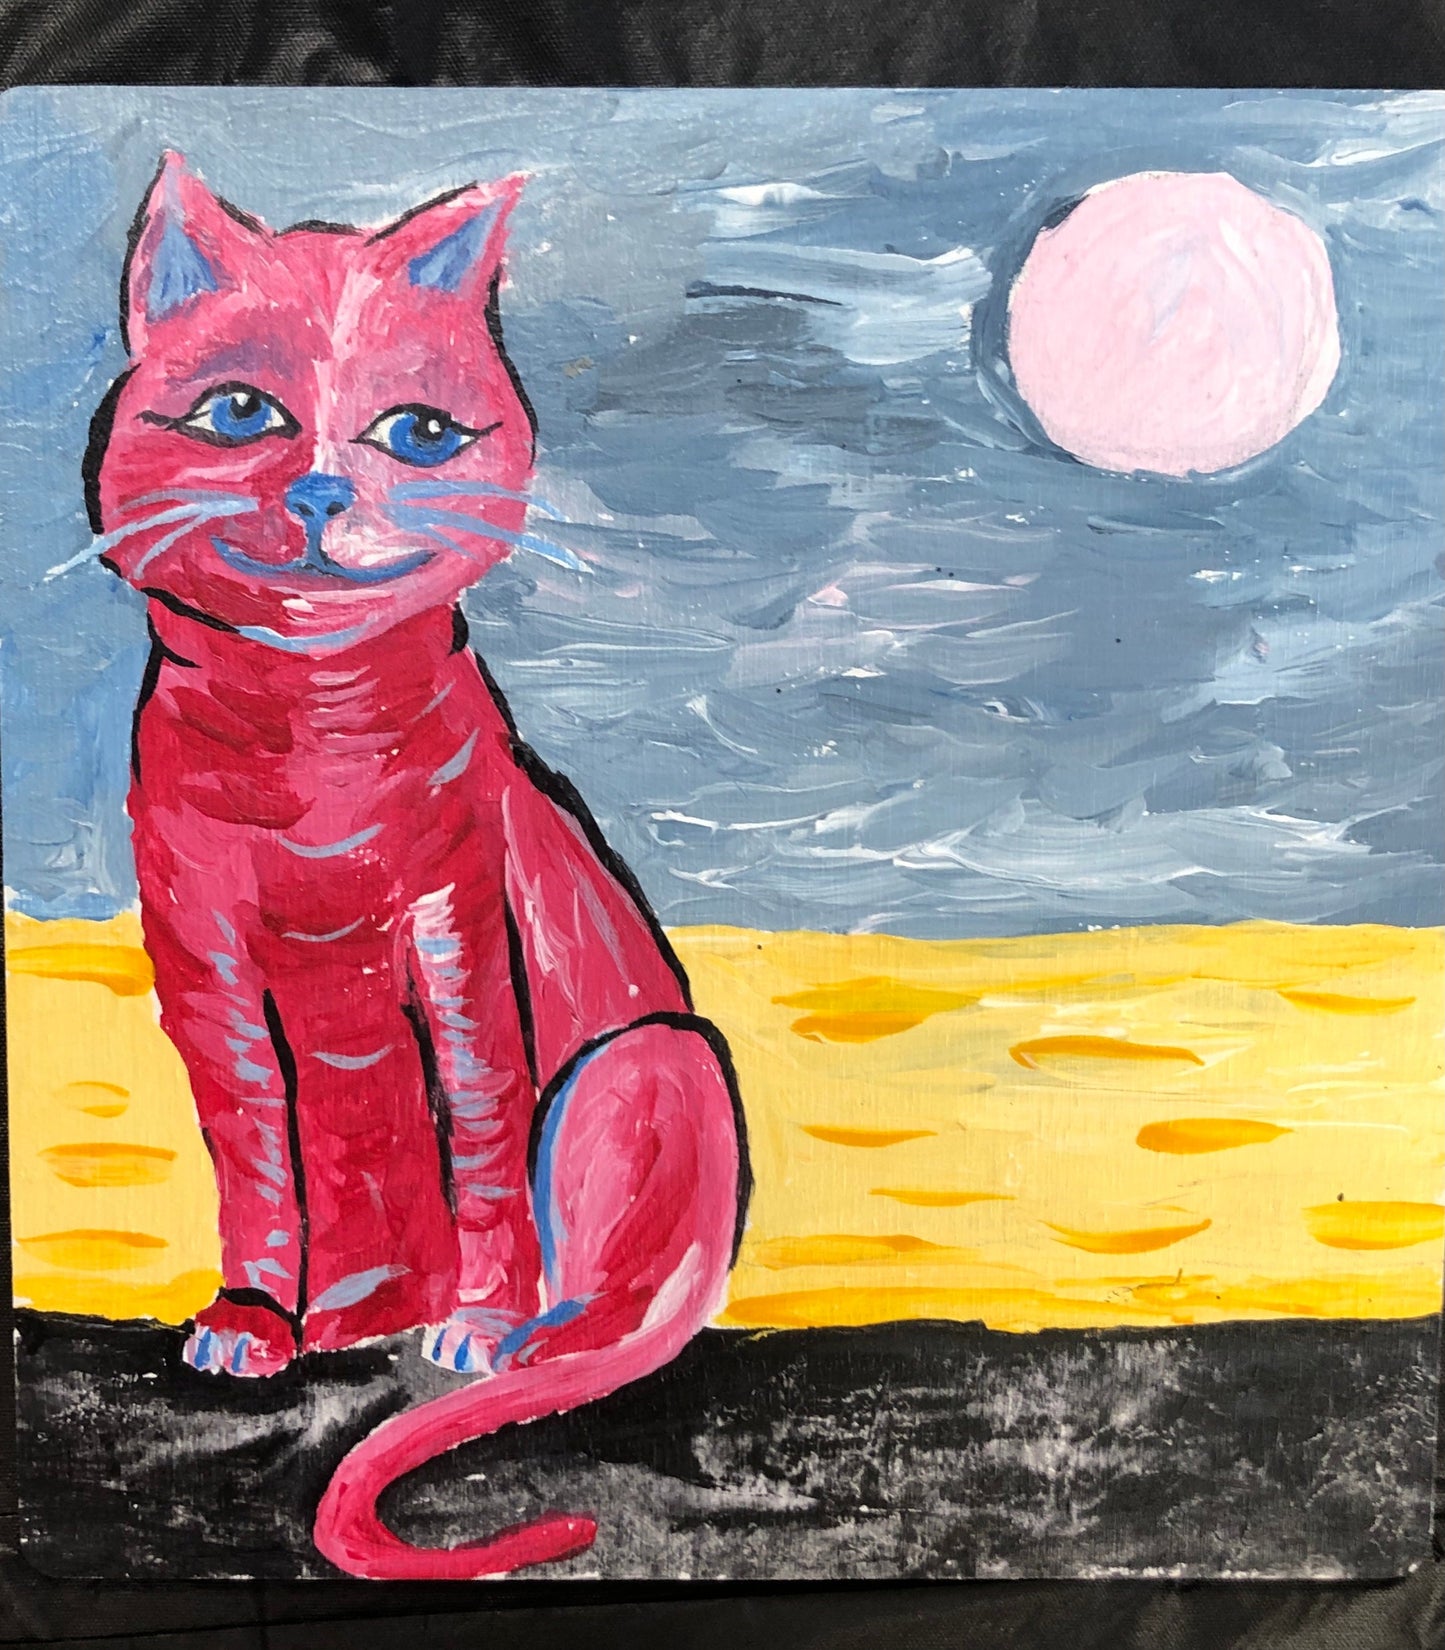 Thu, Oct 6th 4-6P, Kids Paint "All Hallowed Kittens" Public Painting Class